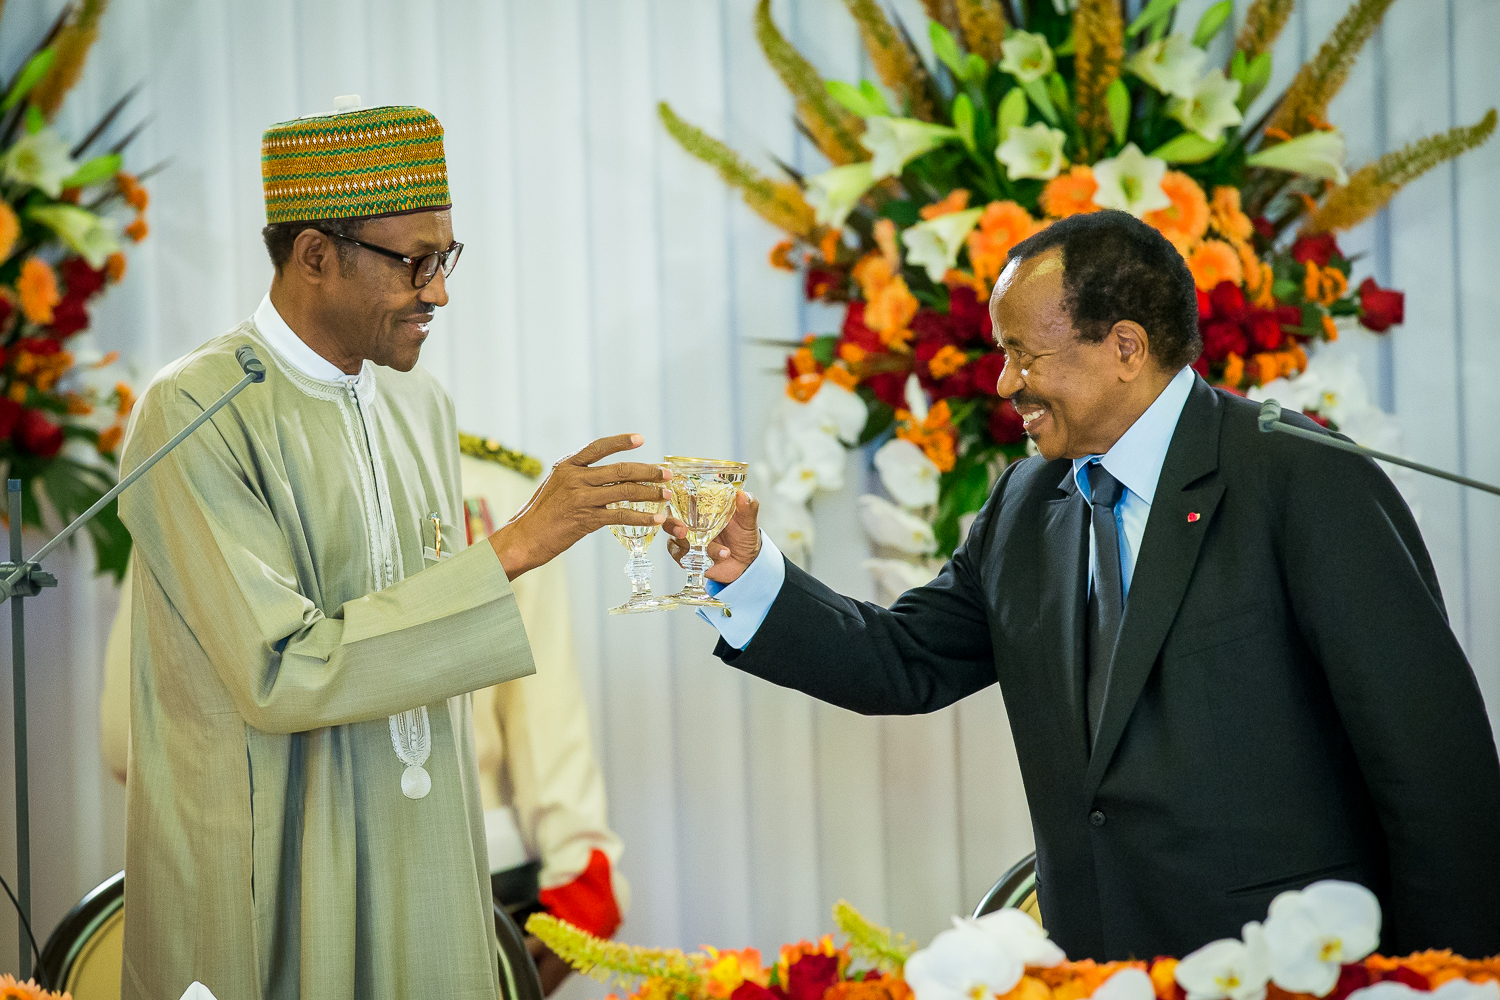 President Buhari and President Paul Biya at the state dinner for PMB in Yaounde, Cameroon